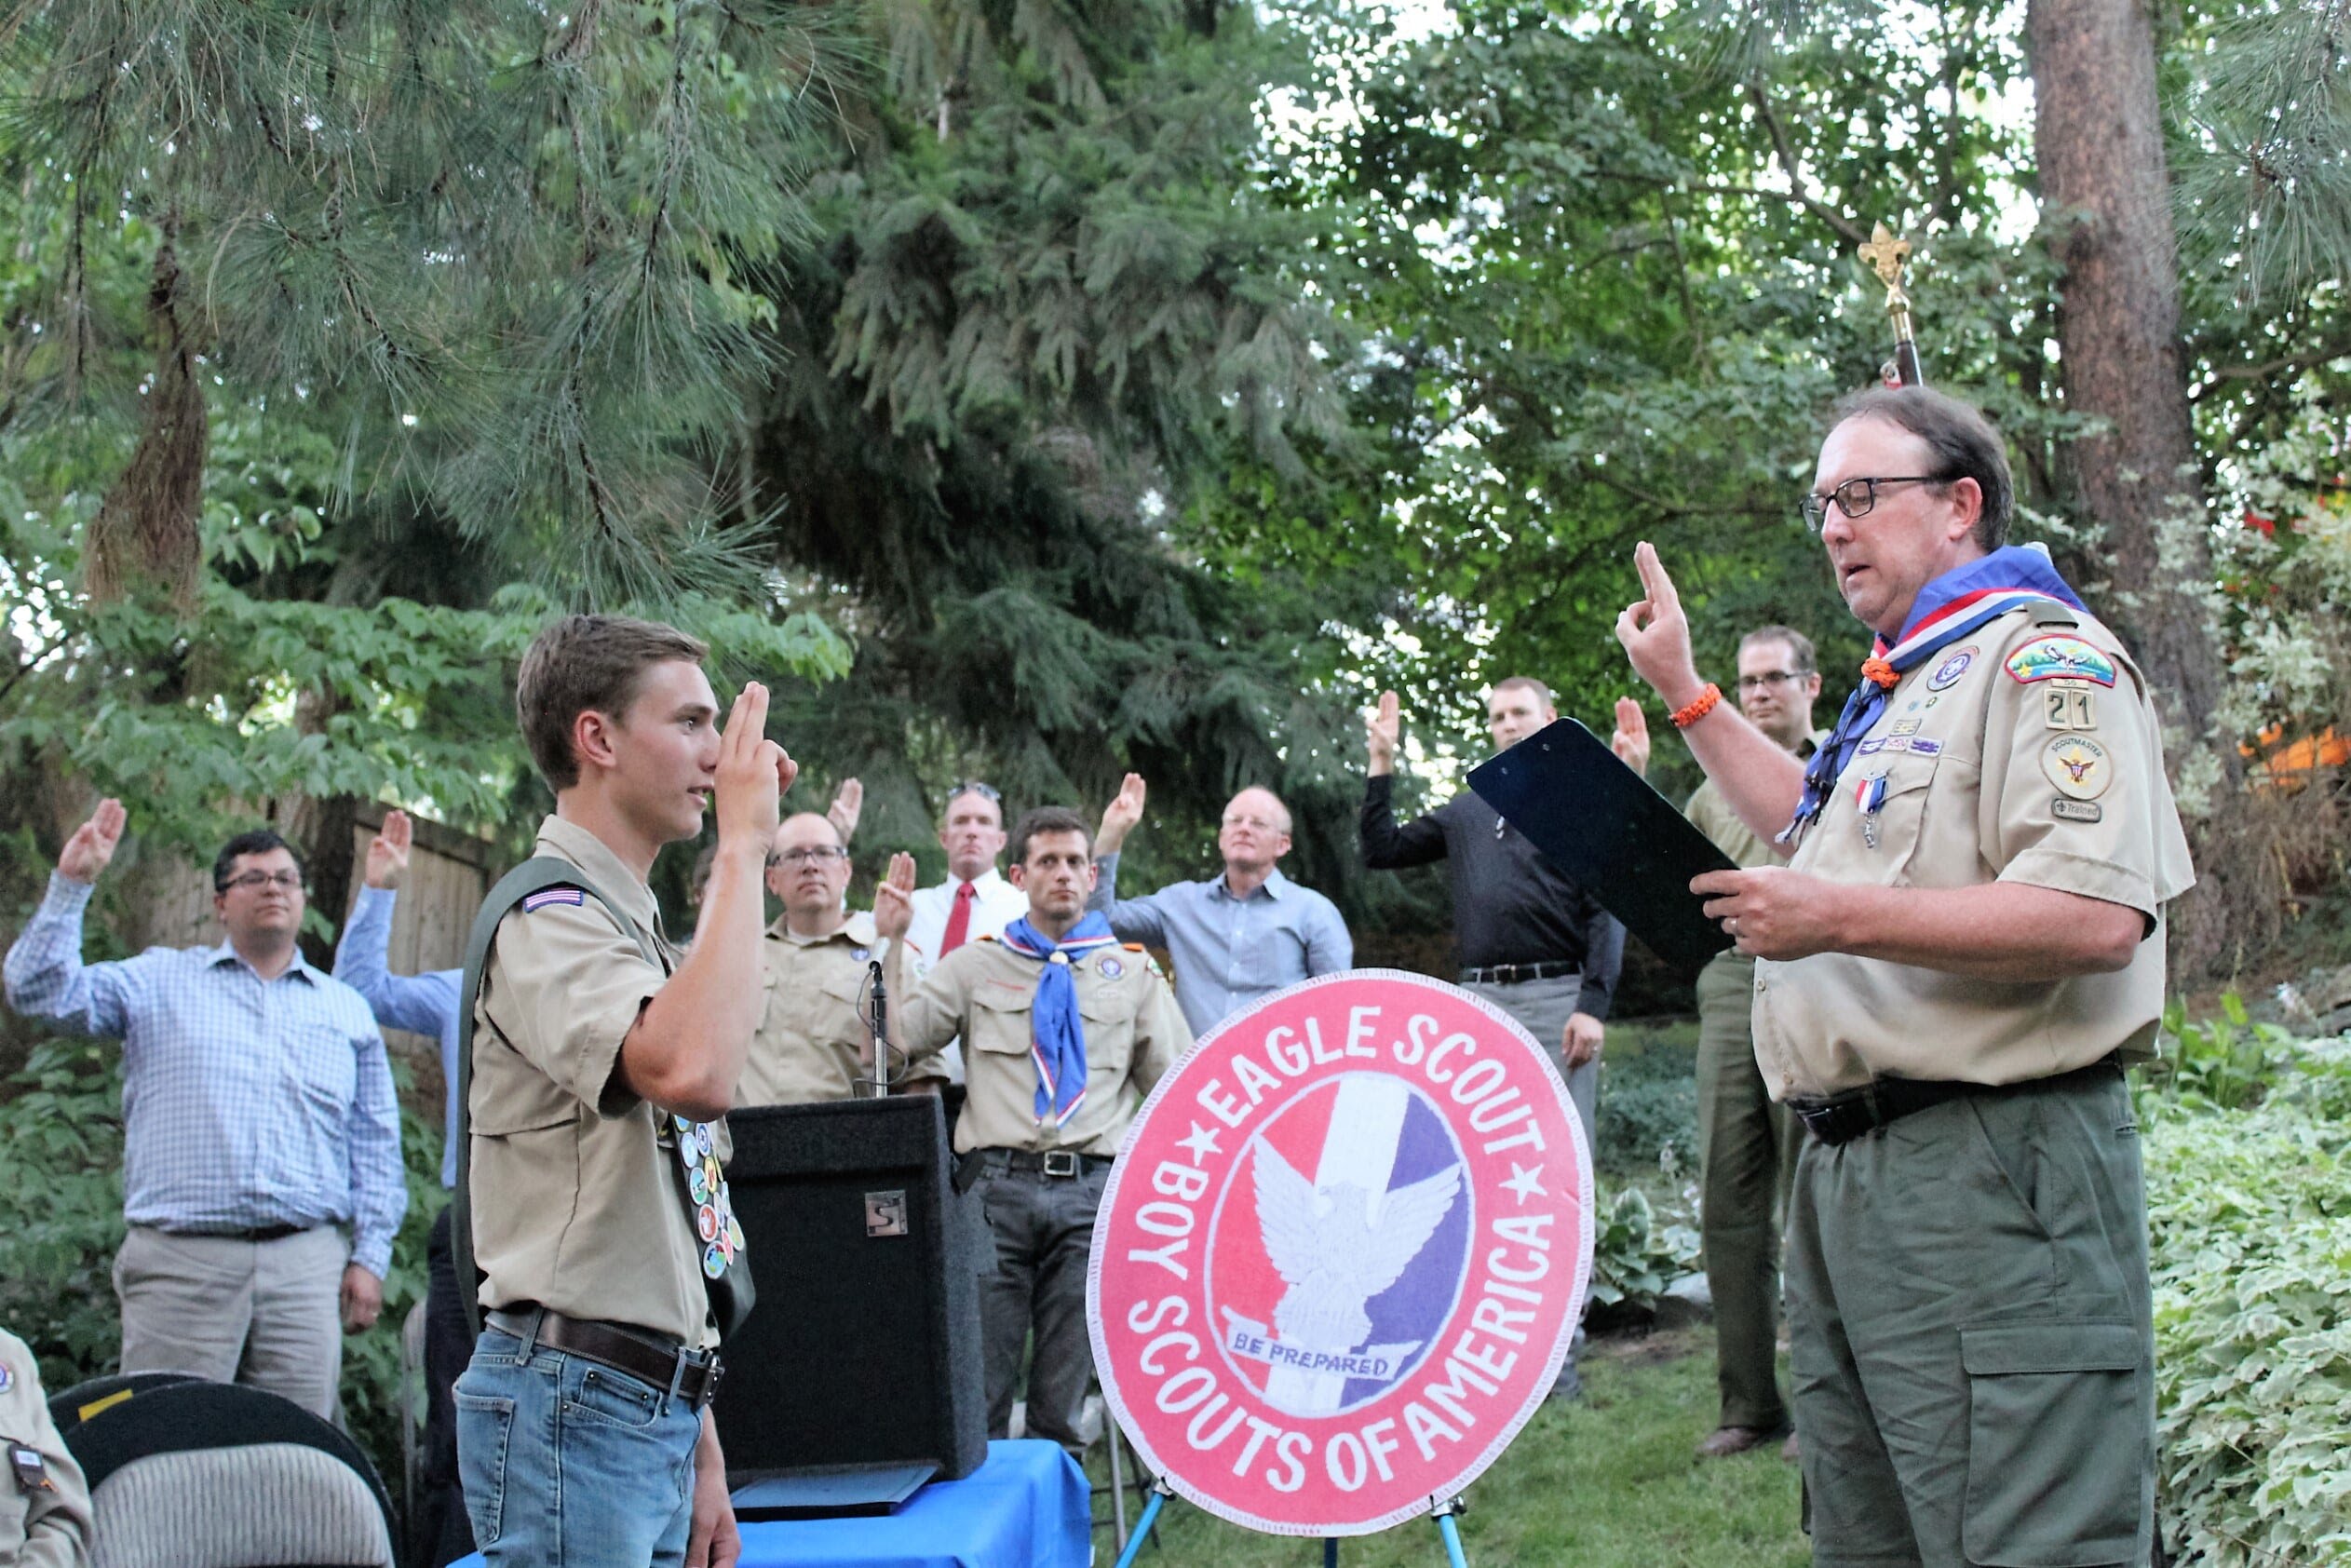 Greg swearing in a eagle scout